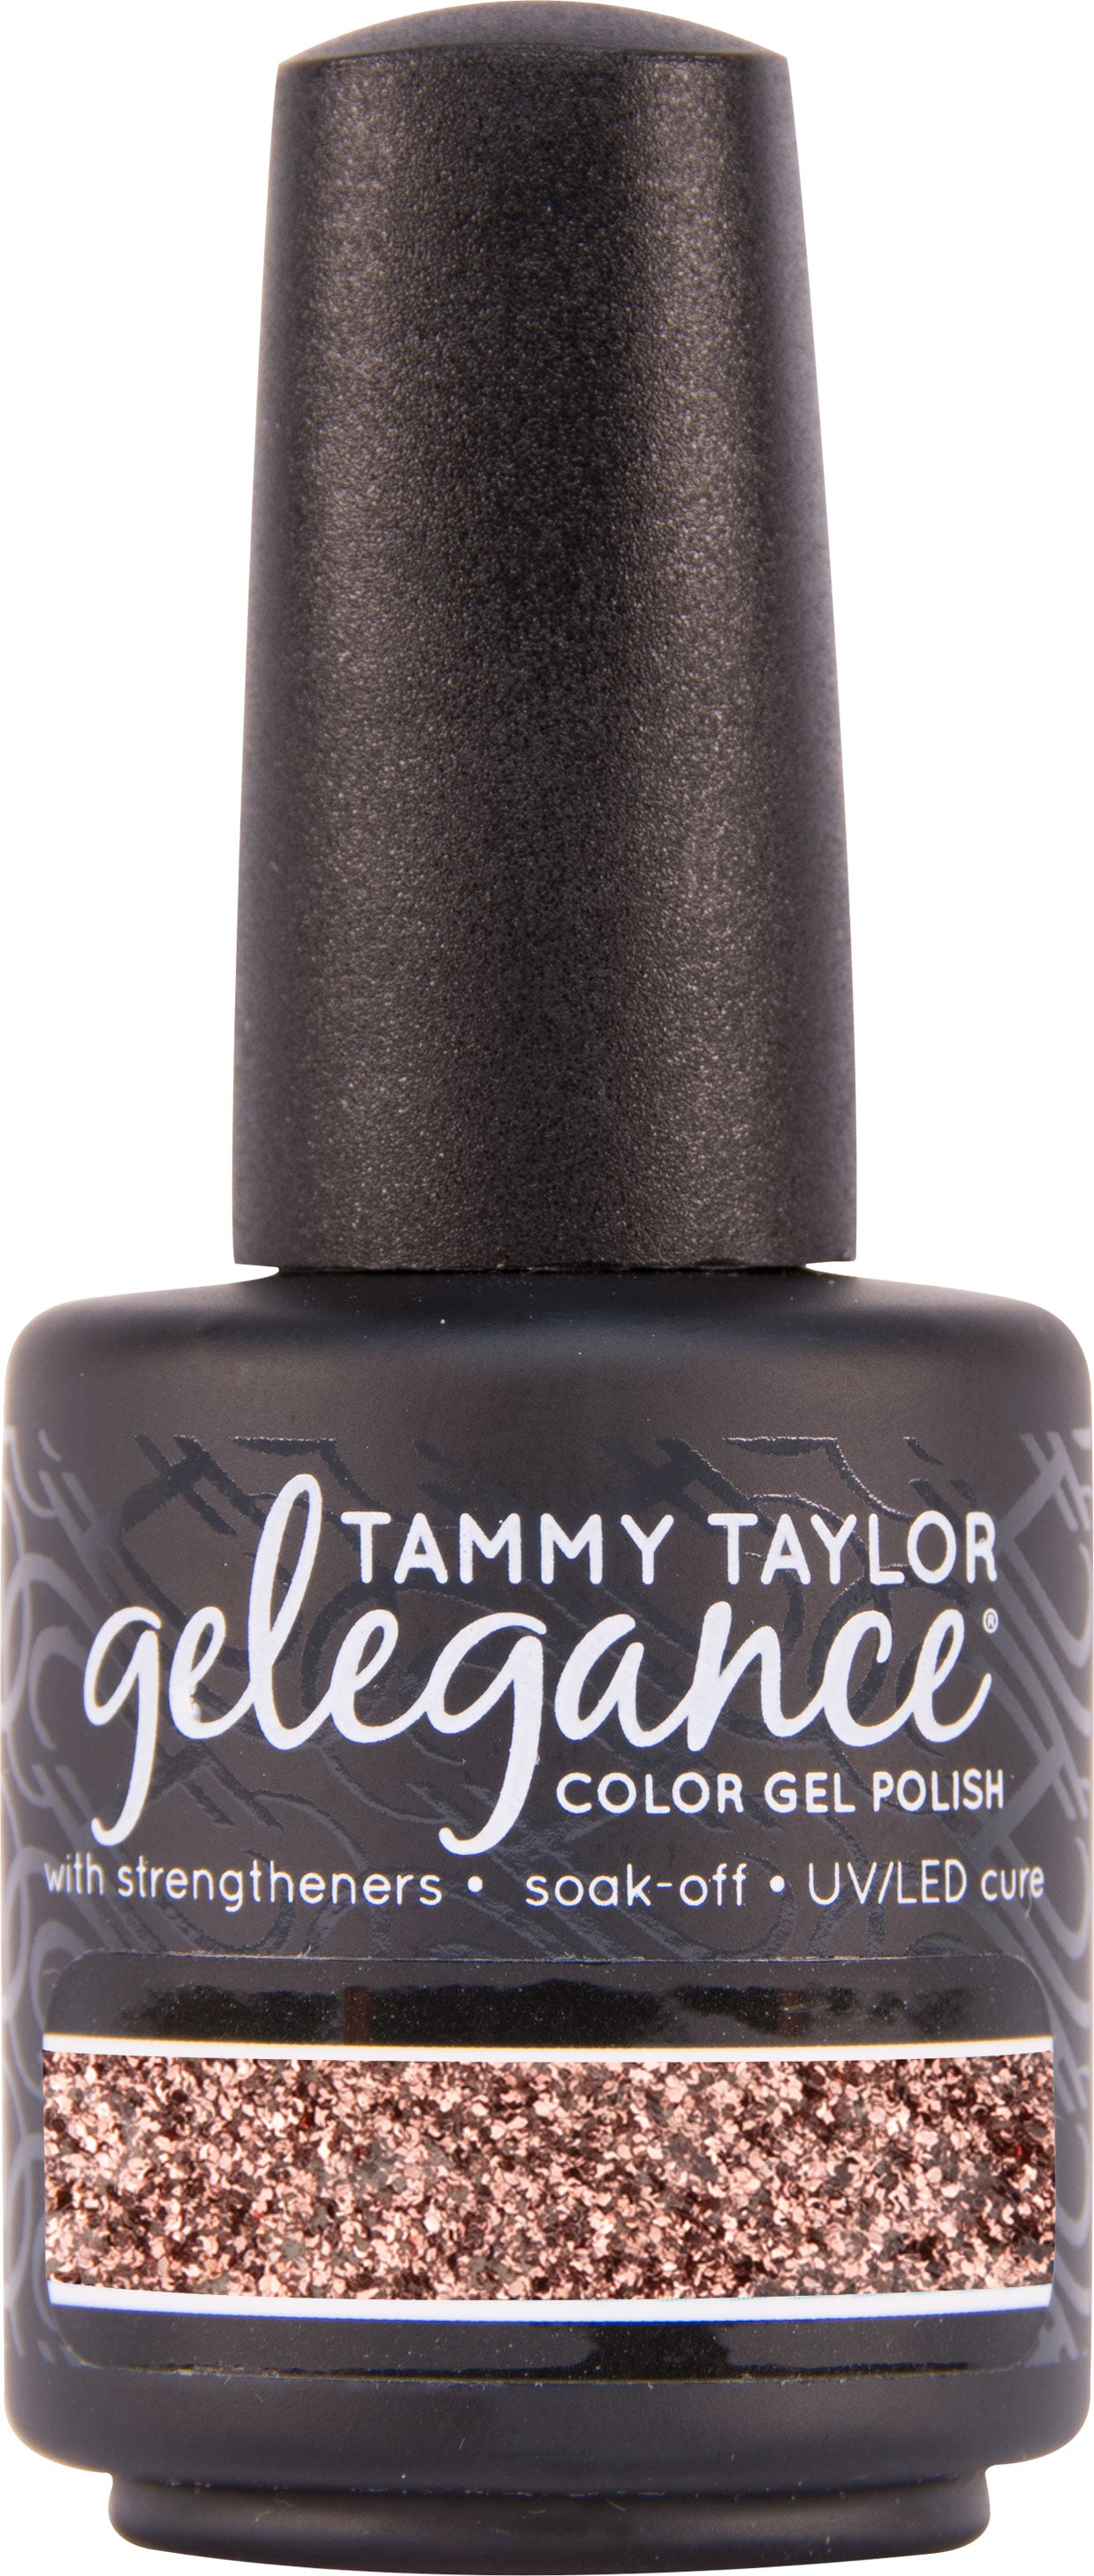 Tammy Taylor Nails - Your Holiday To Sparkle! Gelegance Gel Polish Collection